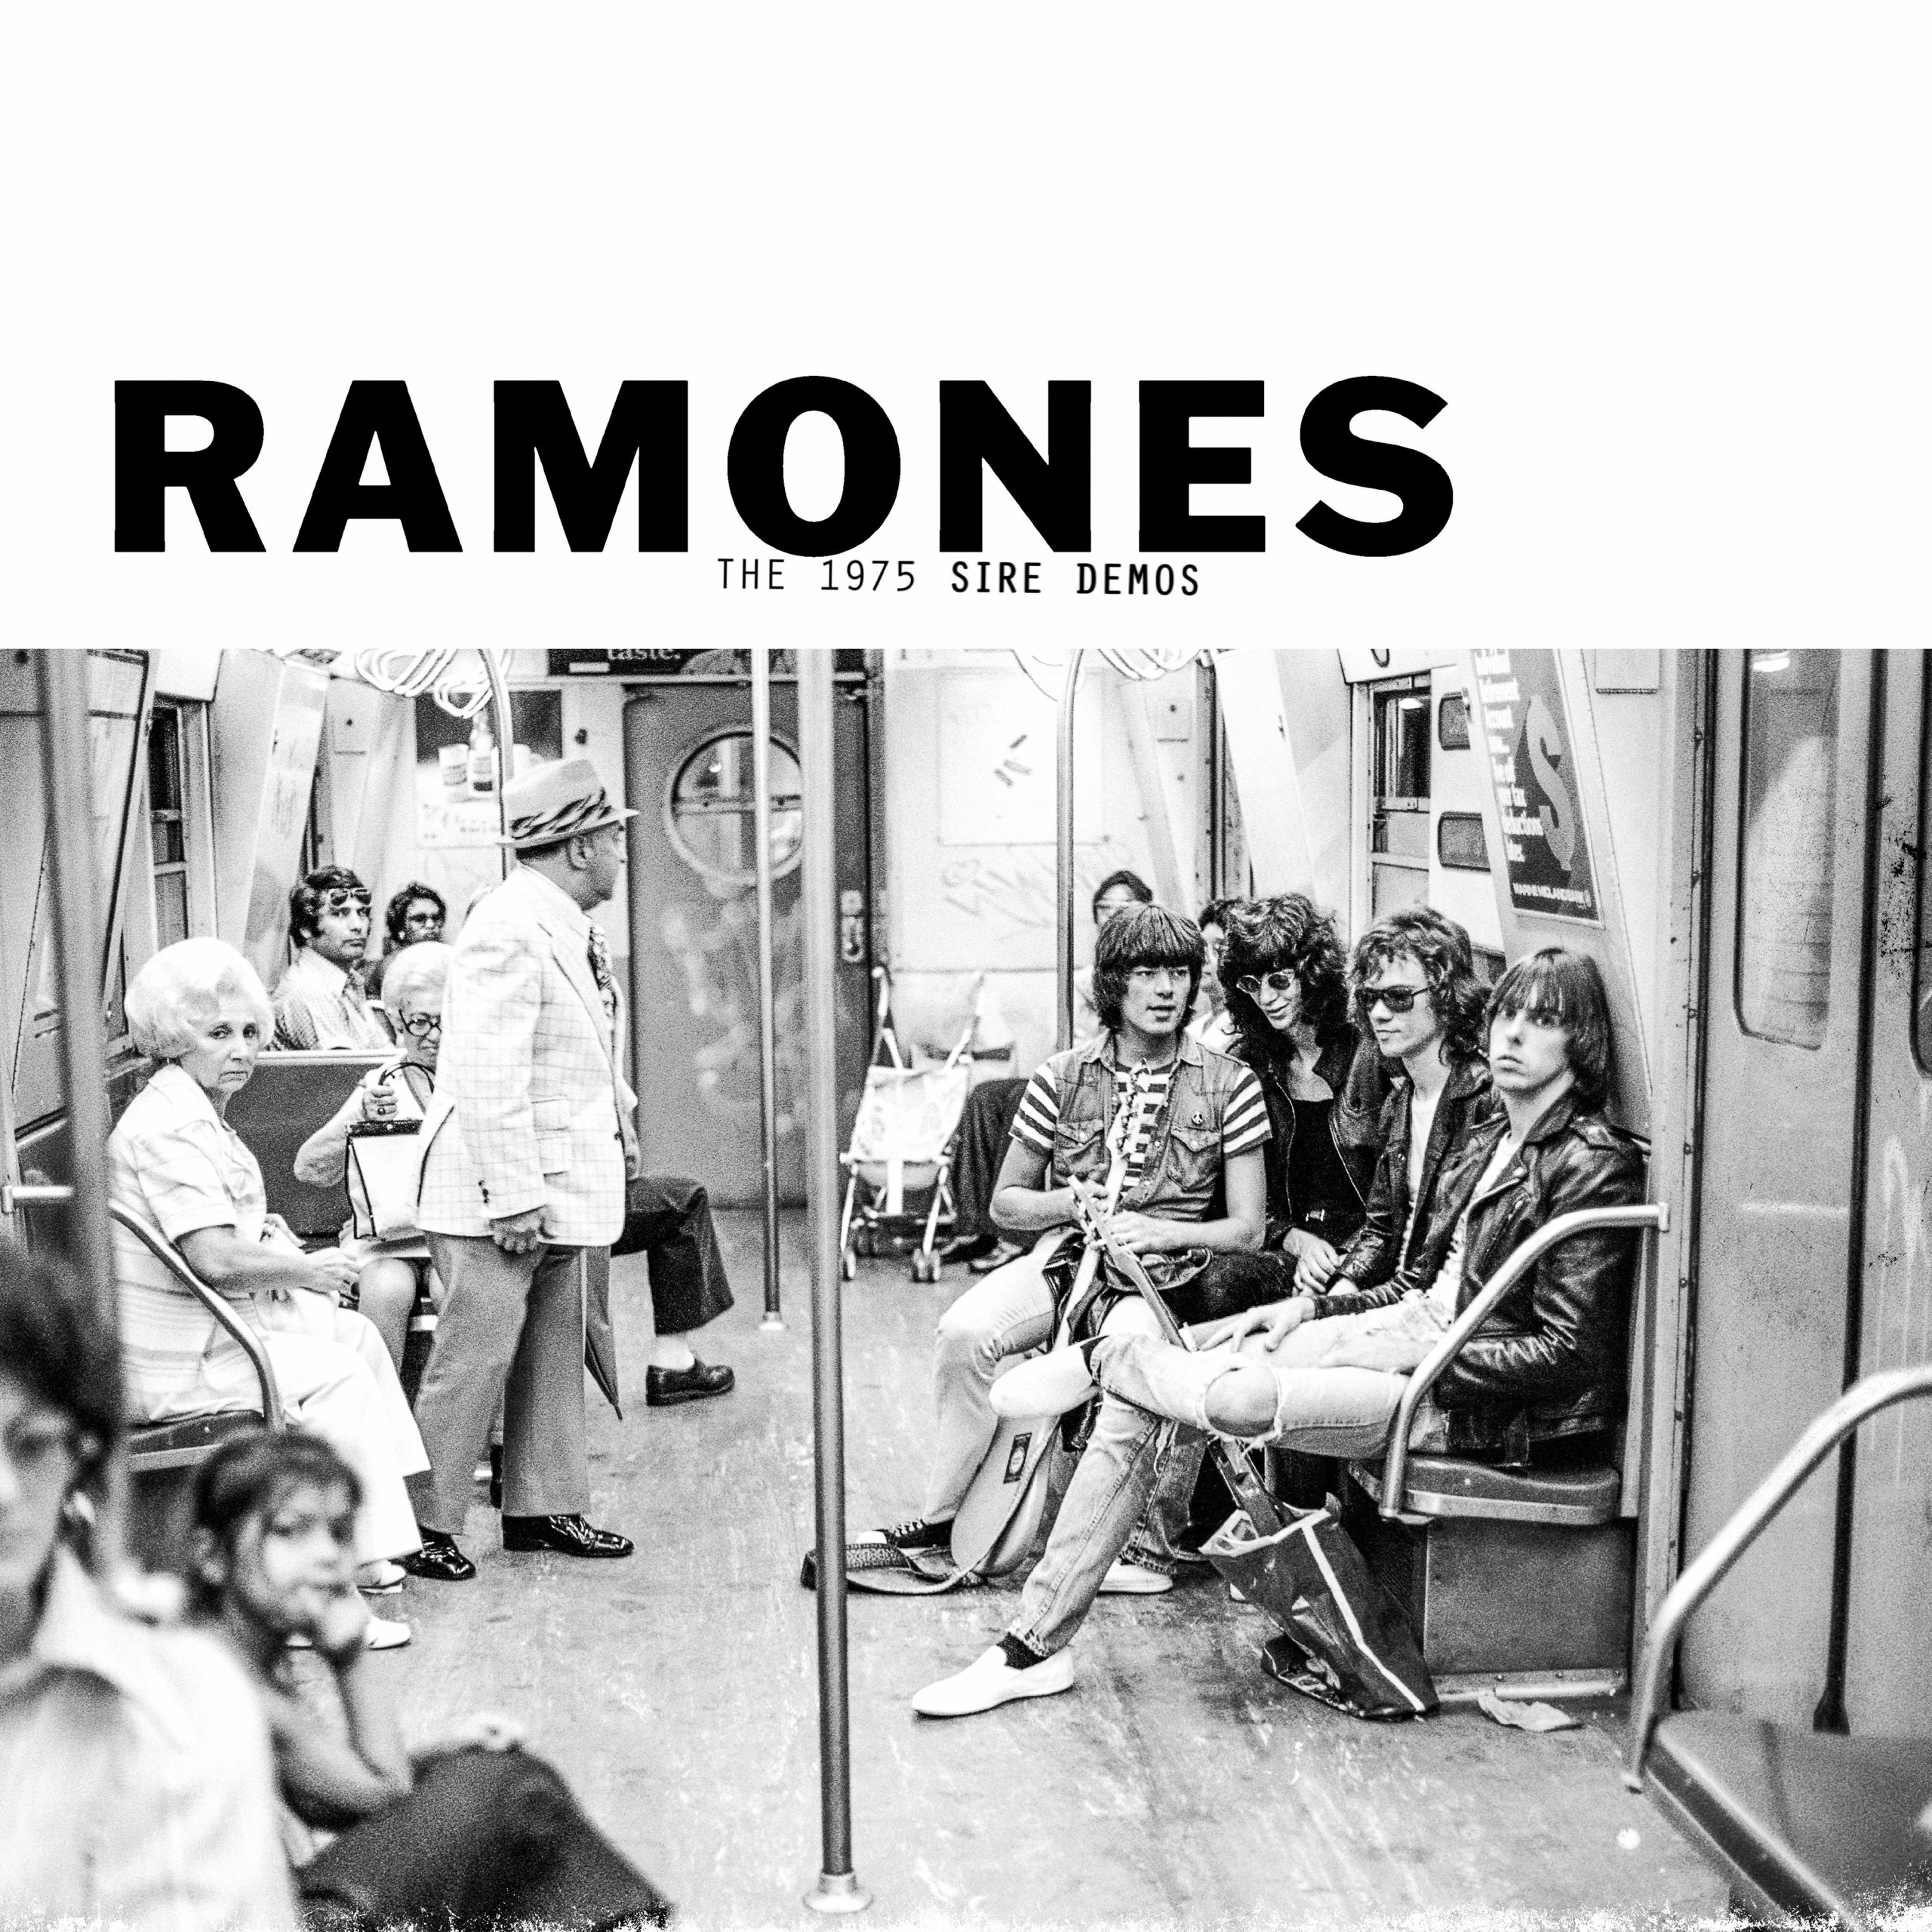 Ramones_1975SireDemos_Cover_4000x4000-scaled.jpg